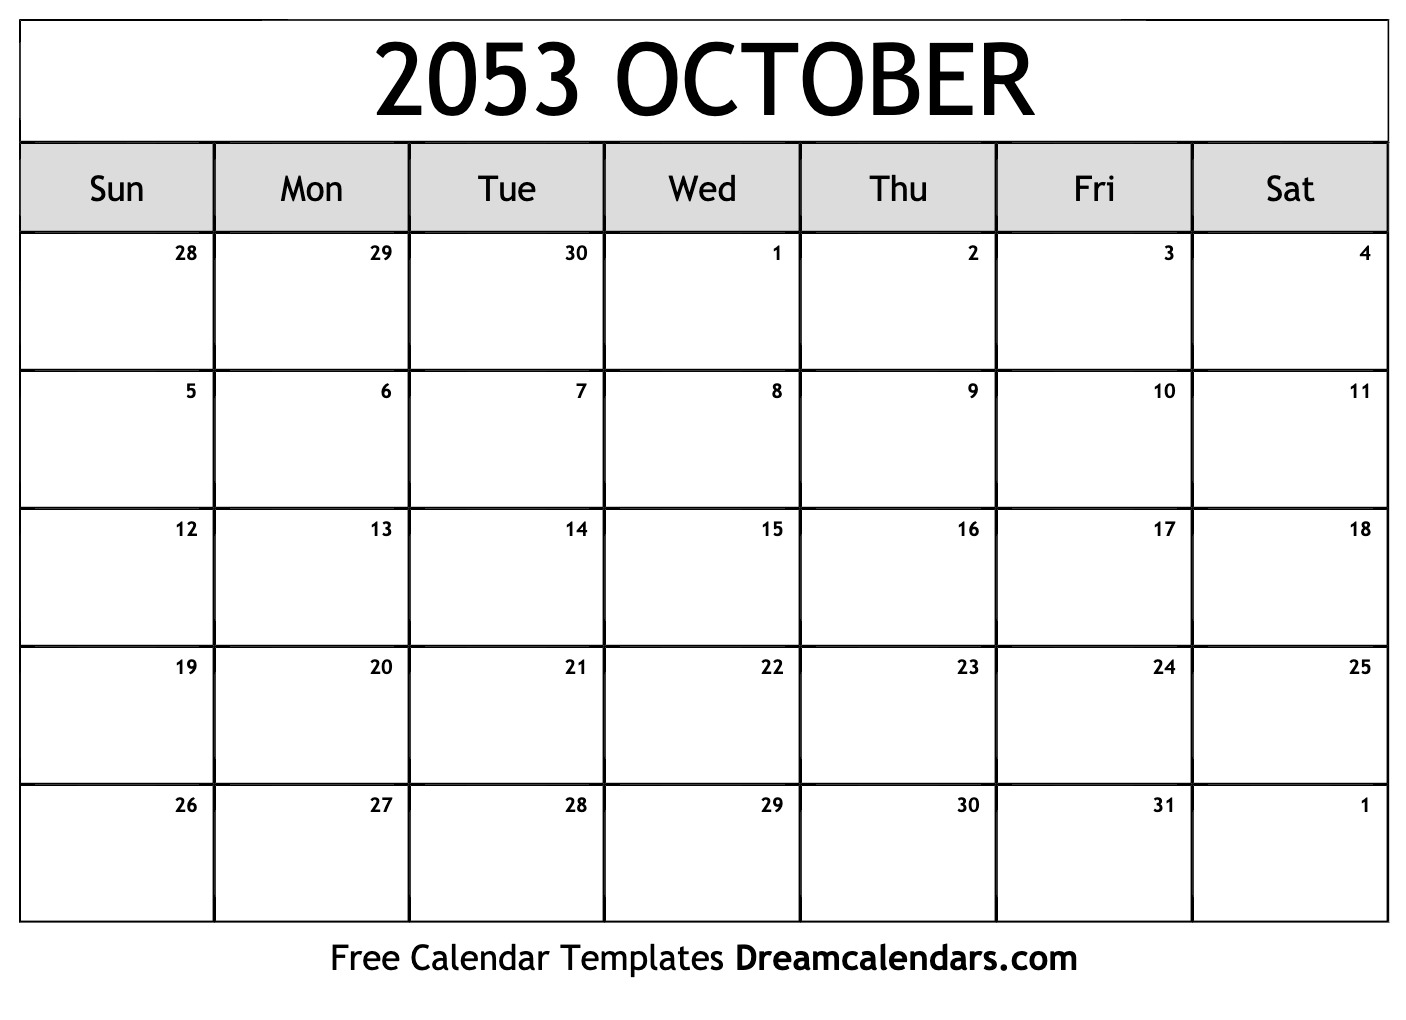 October 2053 Calendar Free Blank Printable With Holidays